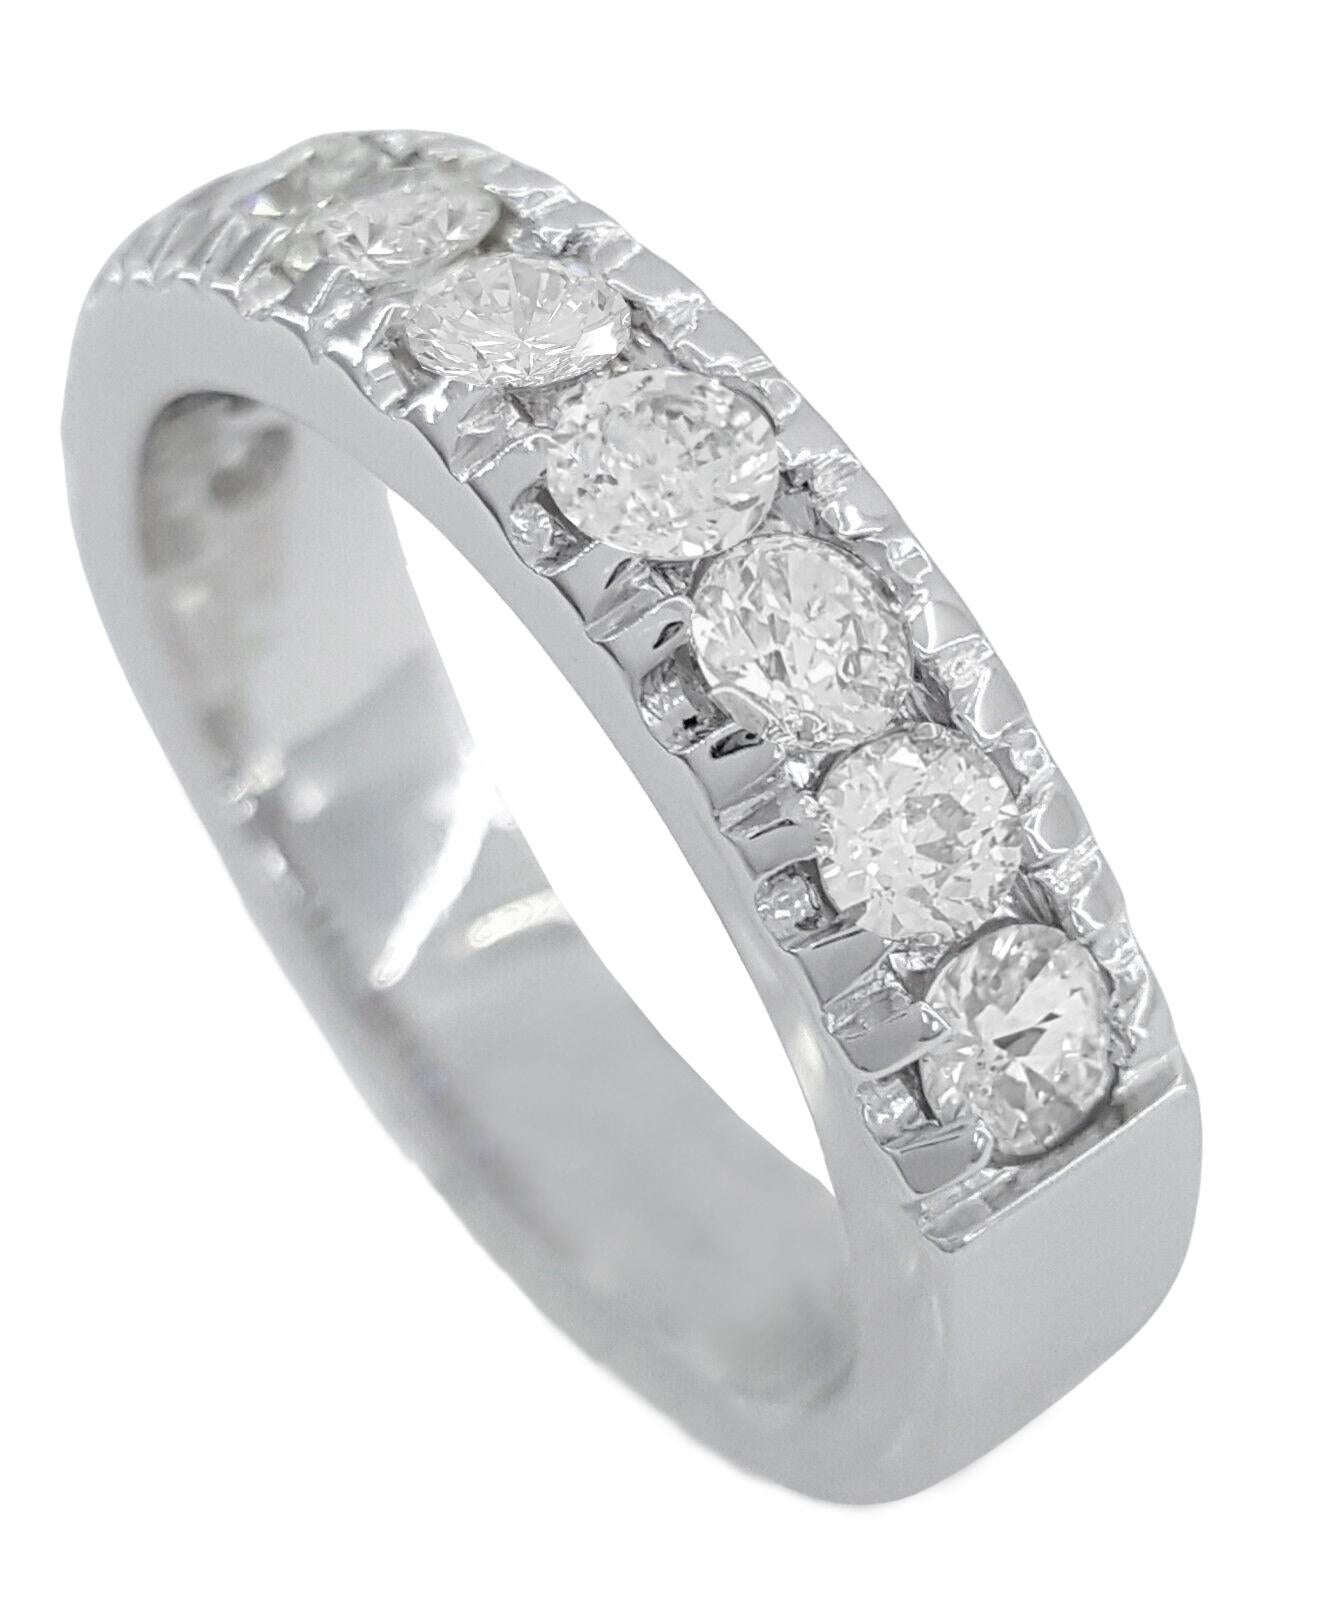 Pave Set Round Brilliant Cut Diamond 4.8 mm Wedding Anniversary / Band Ring.



The ring weighs 6.5 Grams, Size 6.75, 4.8mm wide, there are 10 Natural Round Brilliant Cut Diamonds weighing approximately 1 ct total weight, G-H in color, VS2-SI1 in